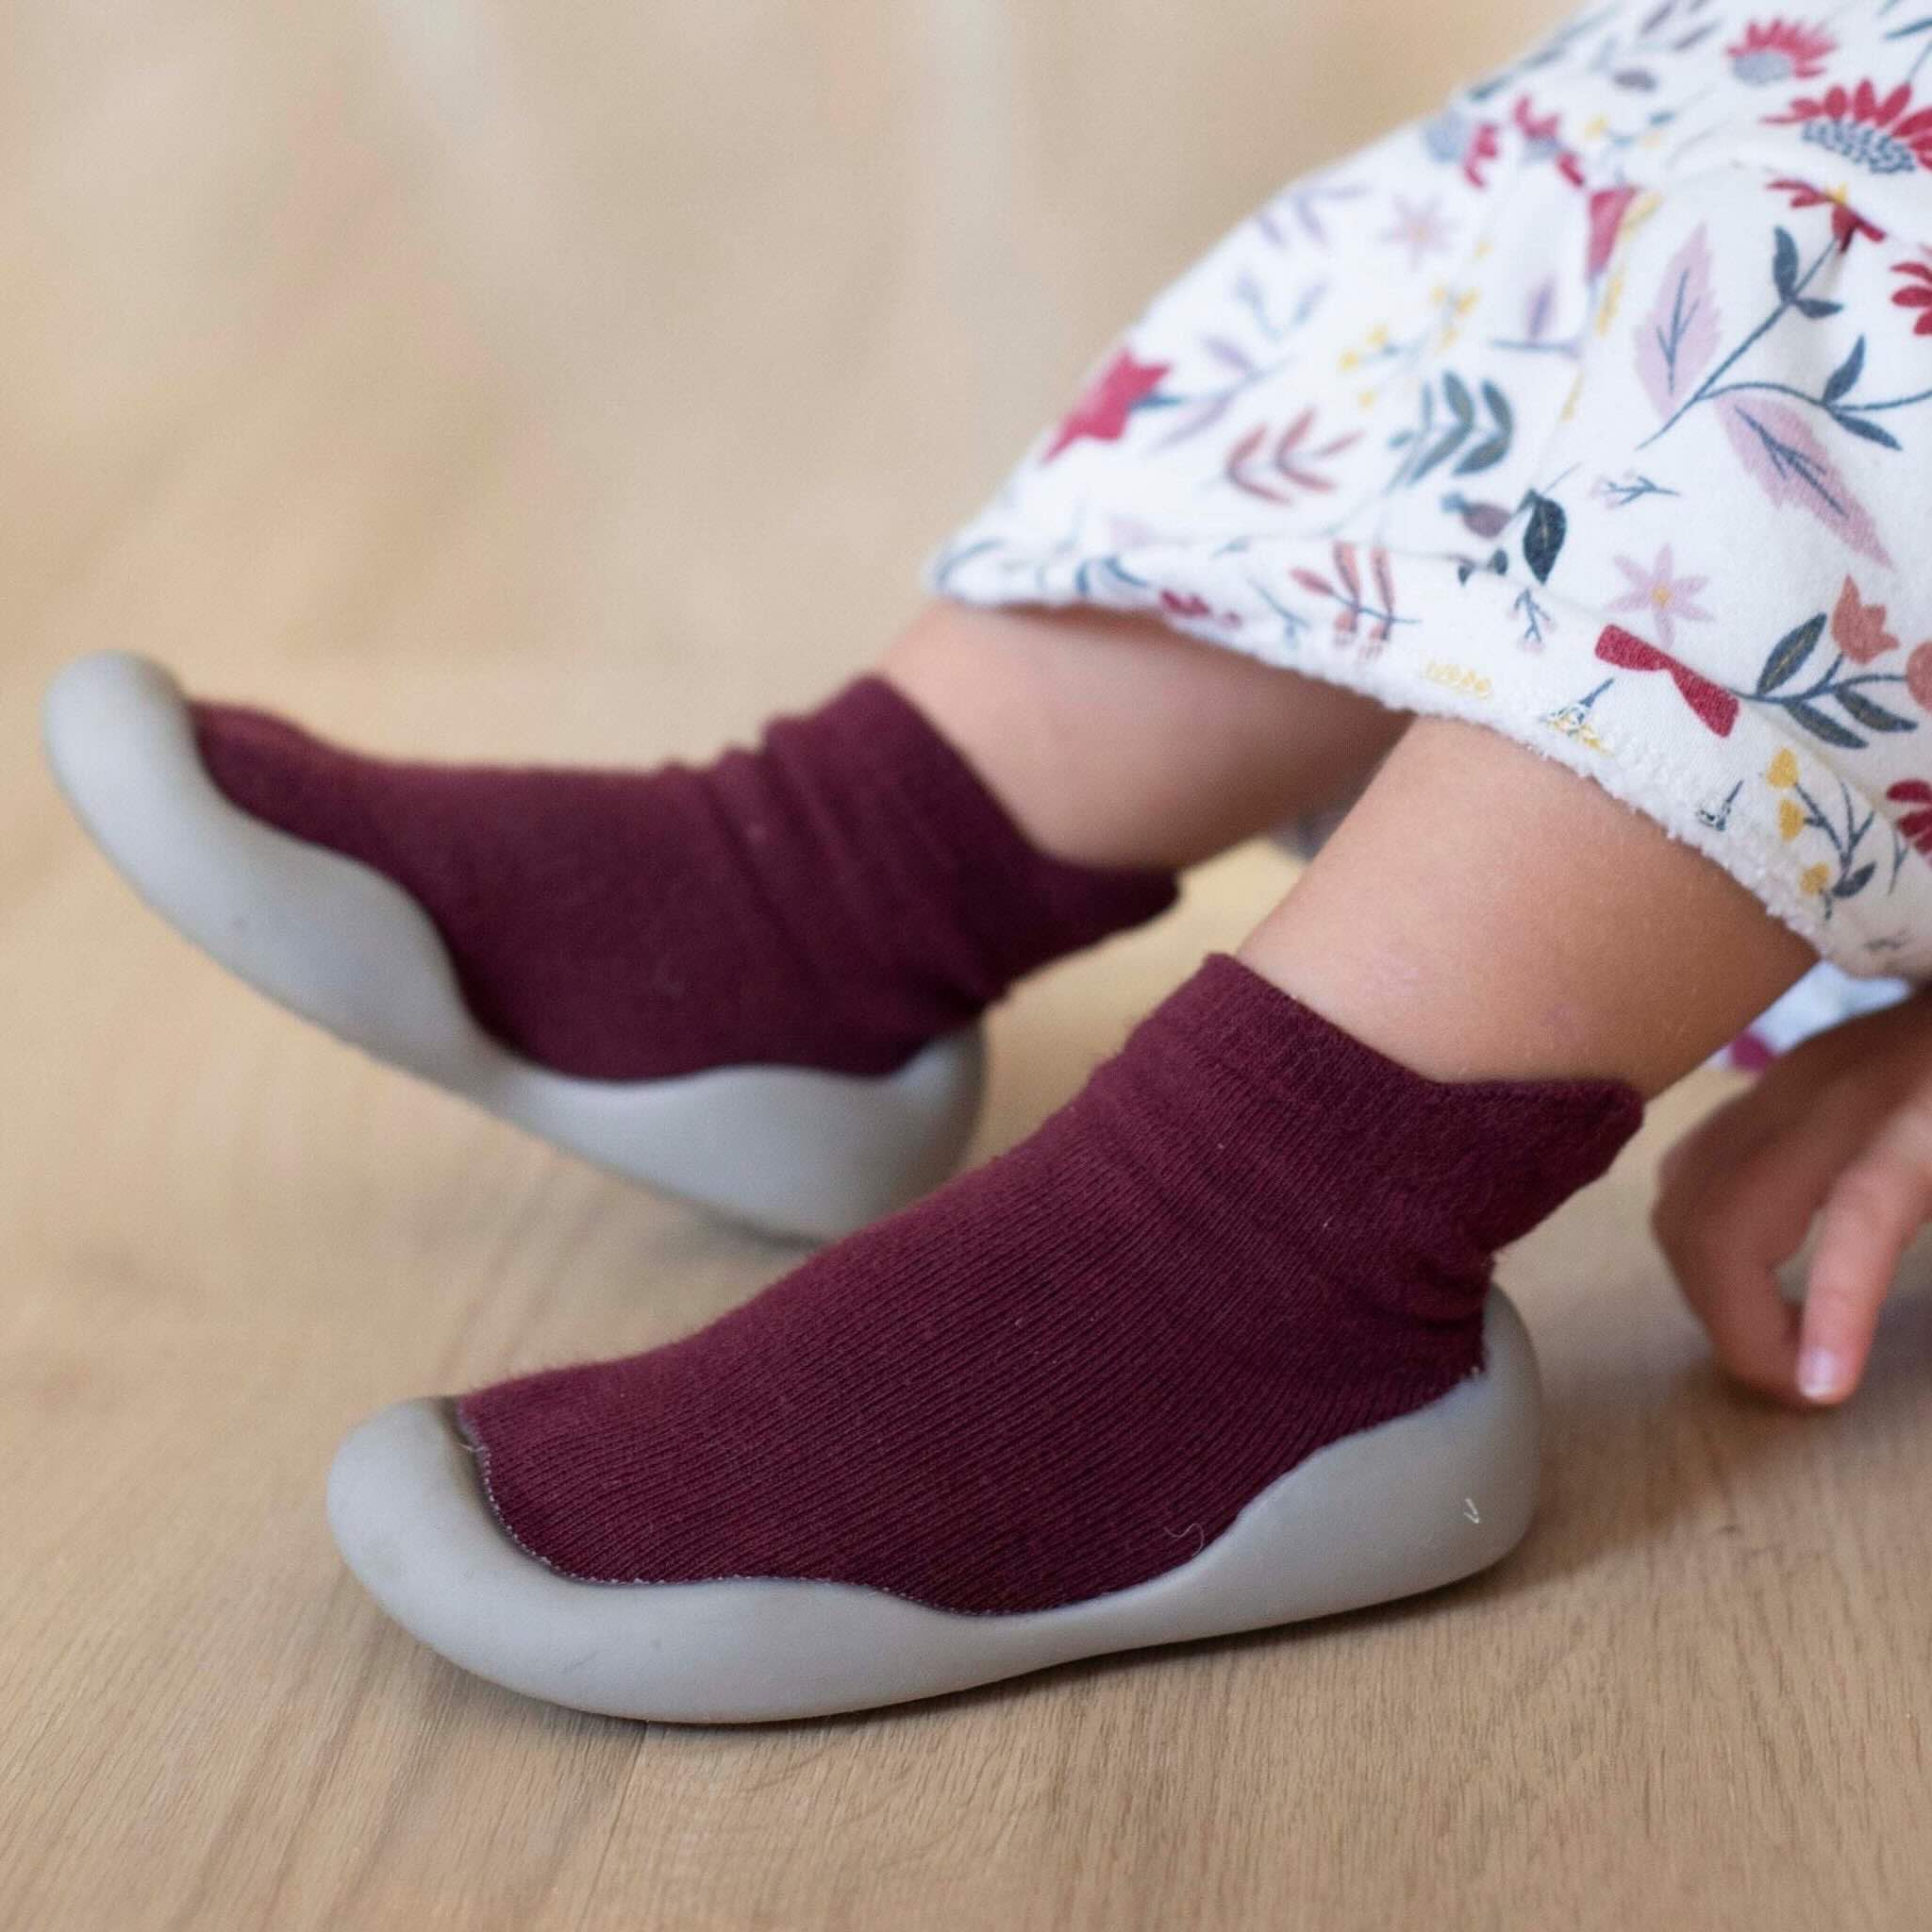 Review of Infant Sock Shoes